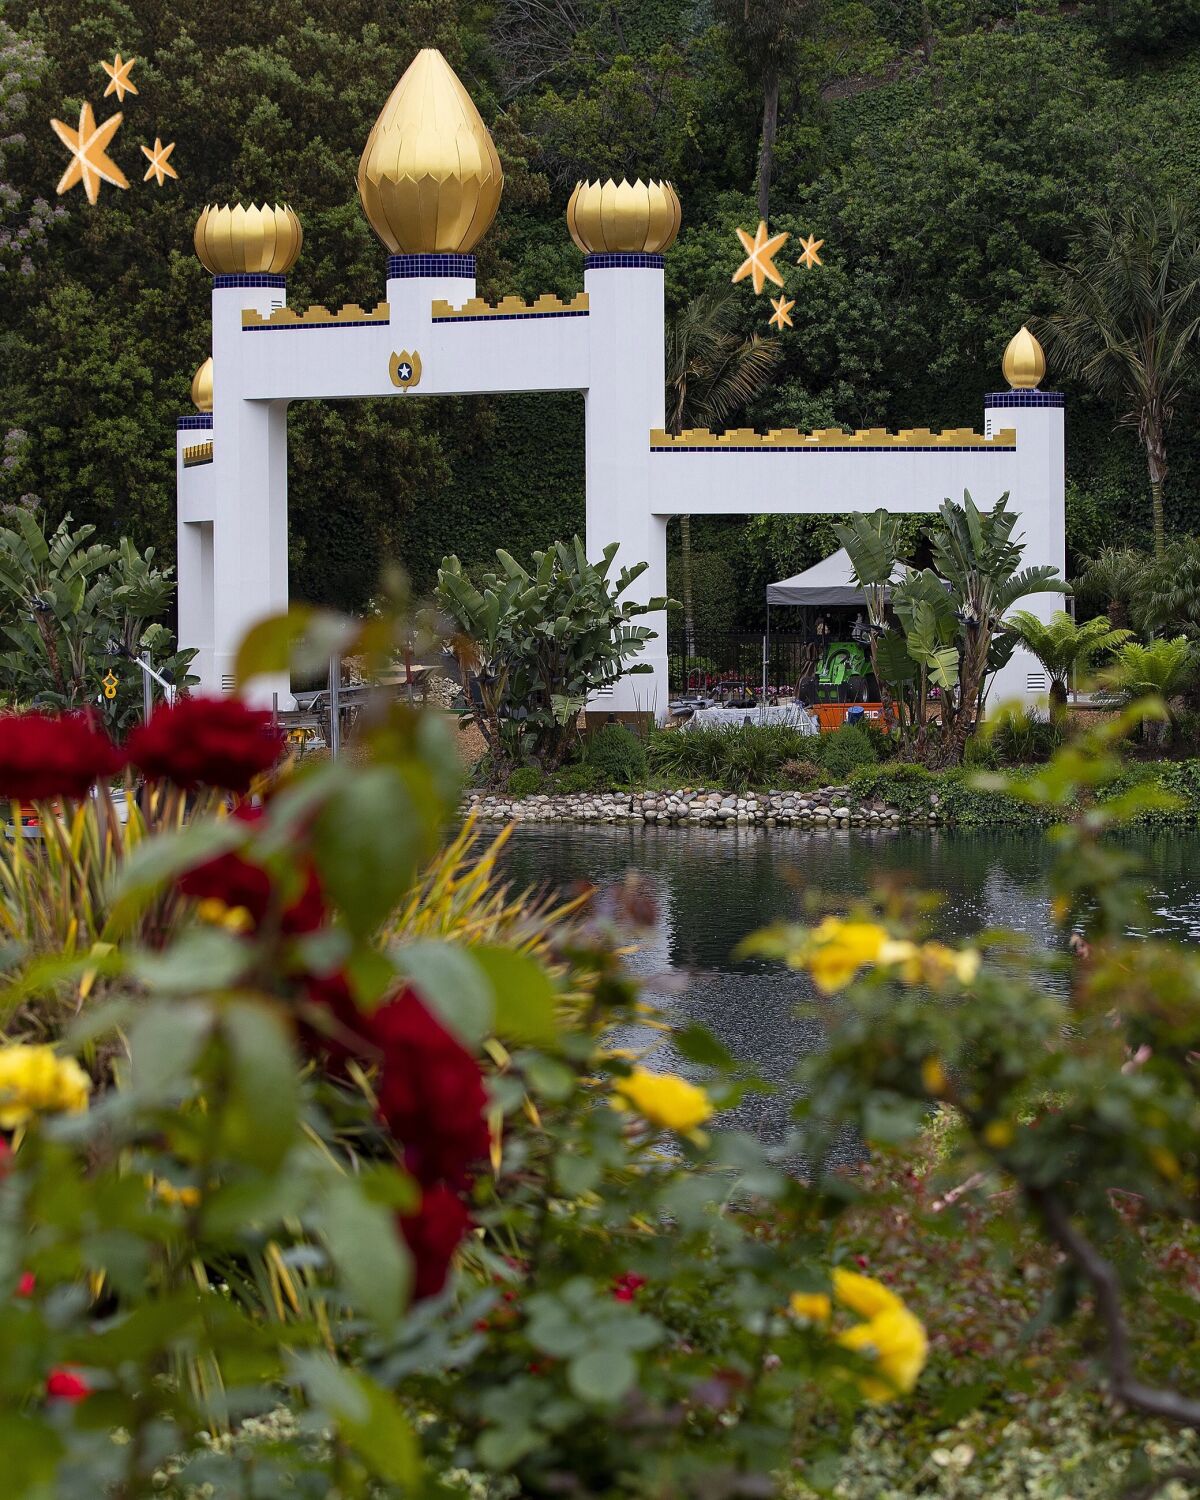 The Golden Lotus Archway stands at the Self-Realization Fellowship Lake Shrine in Pacific Palisades.